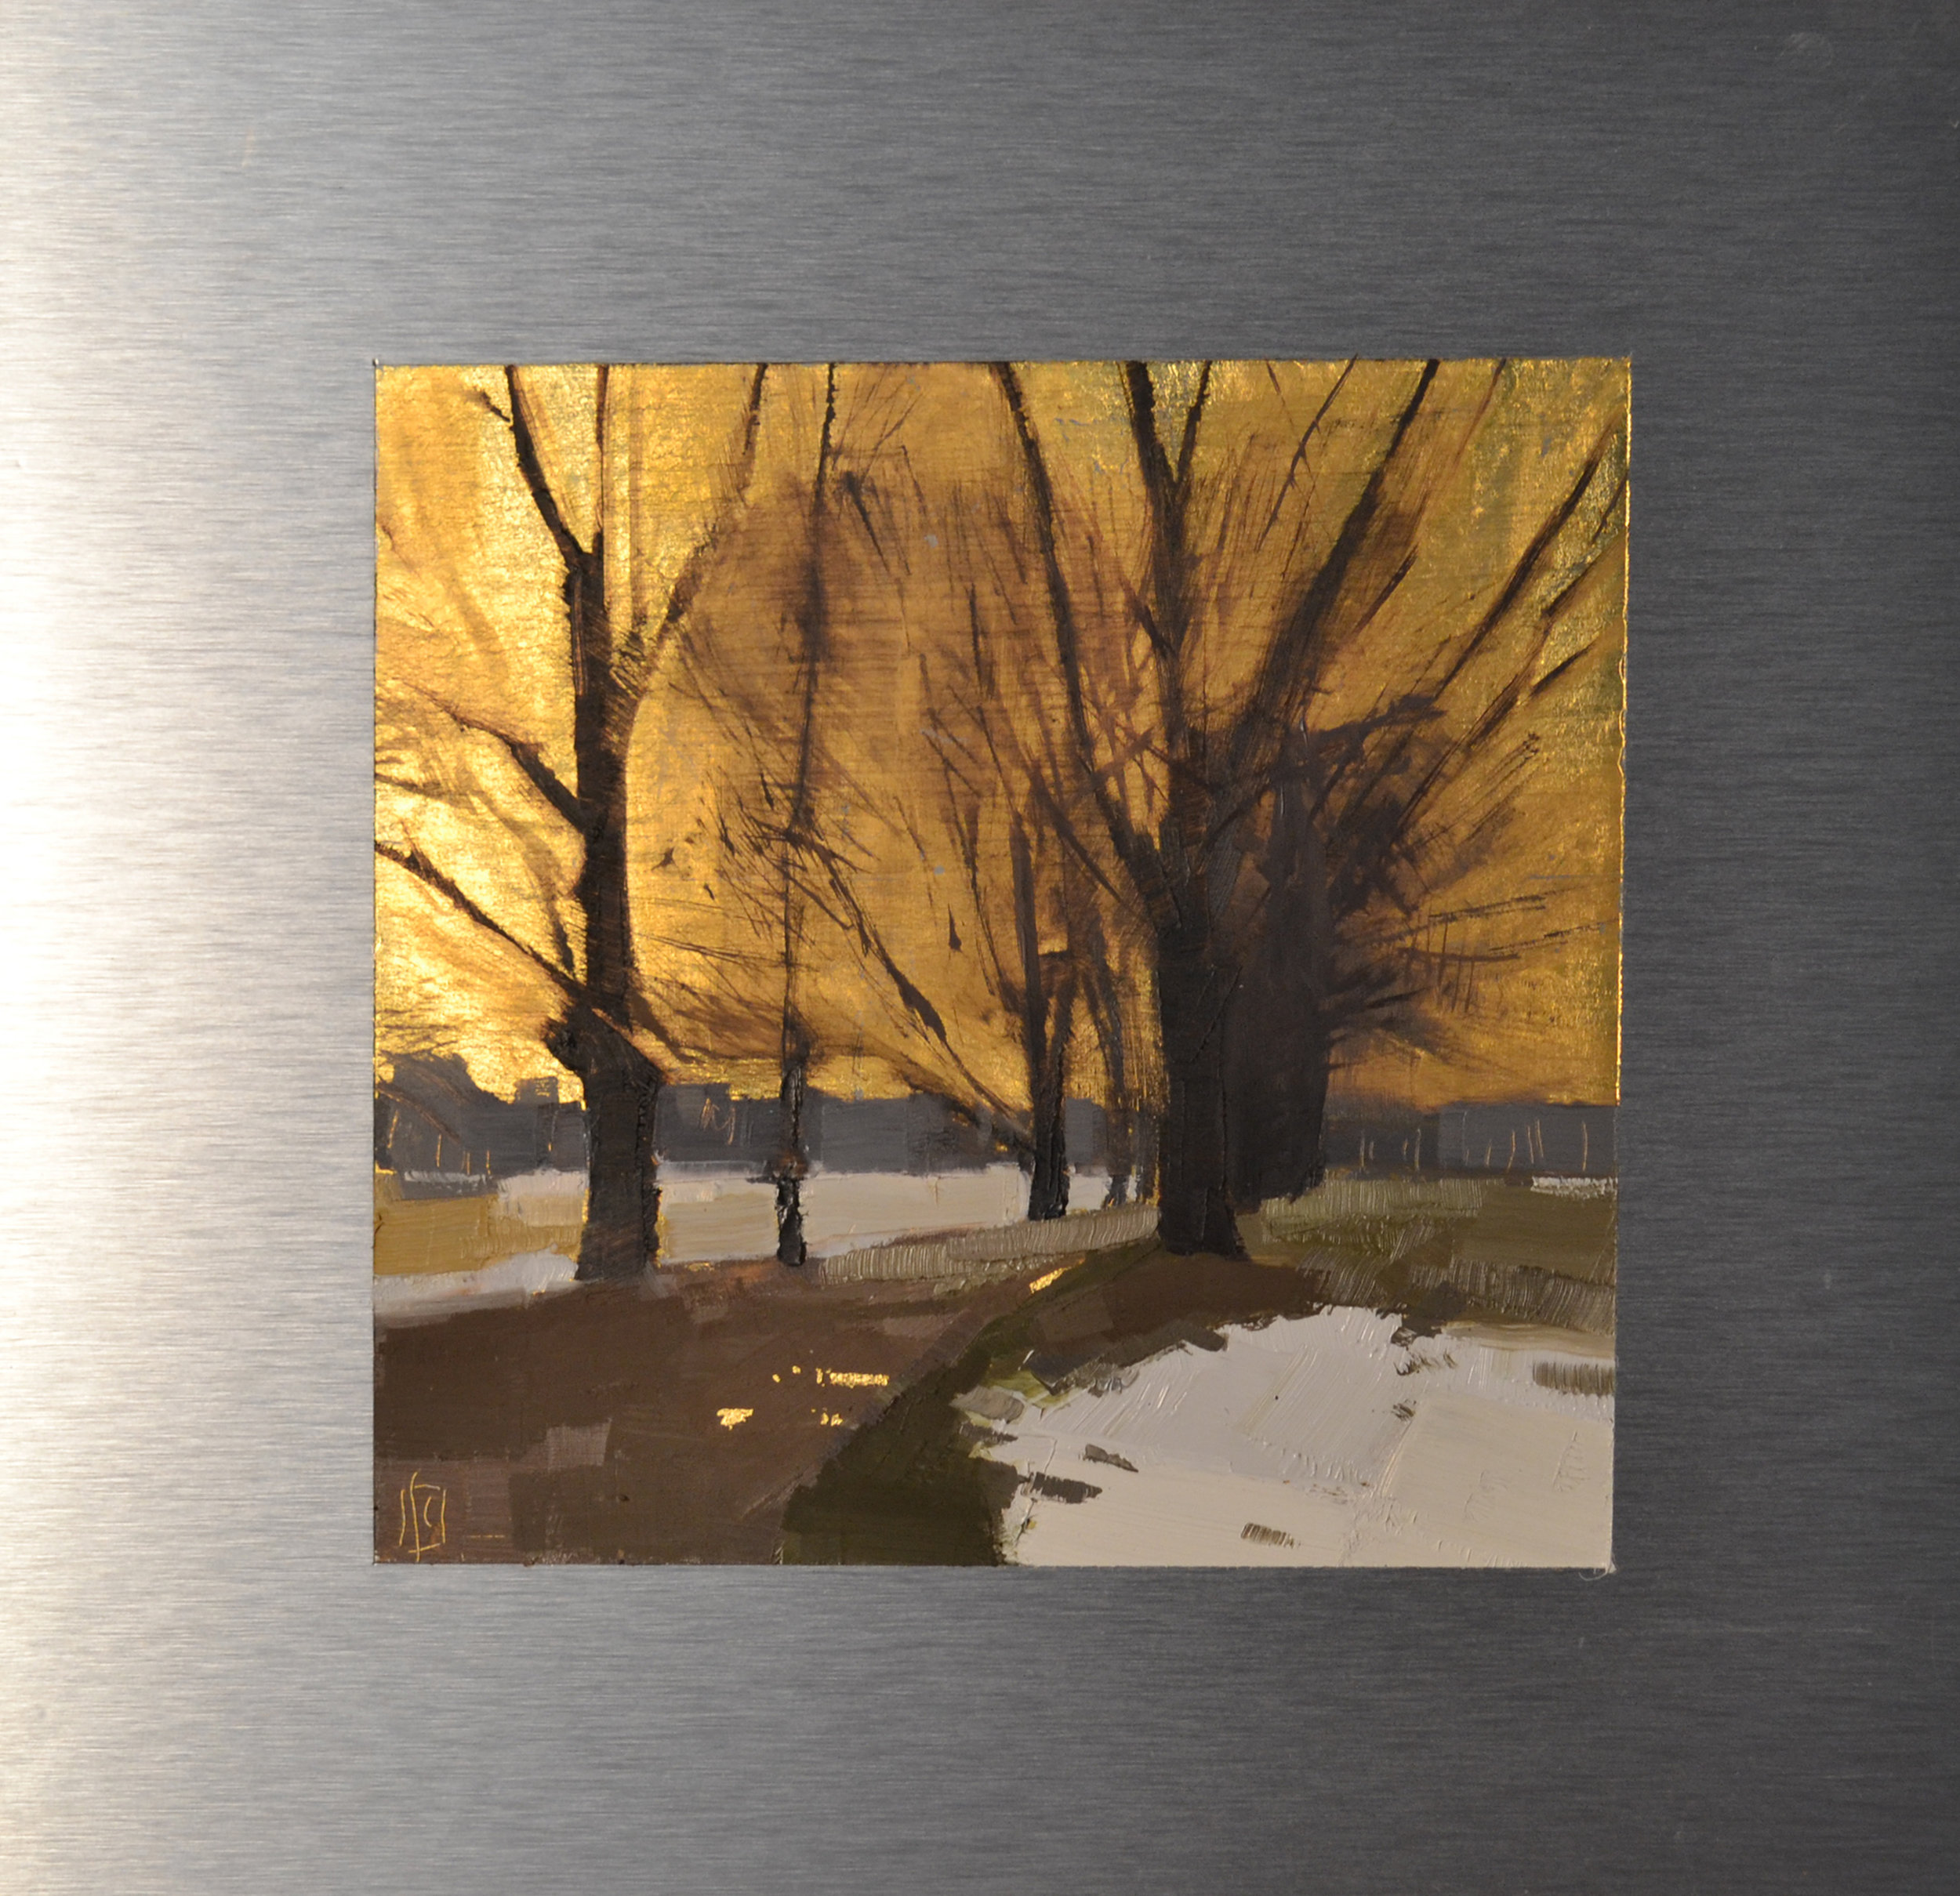  Spring Snow 7 x 7 oil and 23K gold on aluminum  sold 